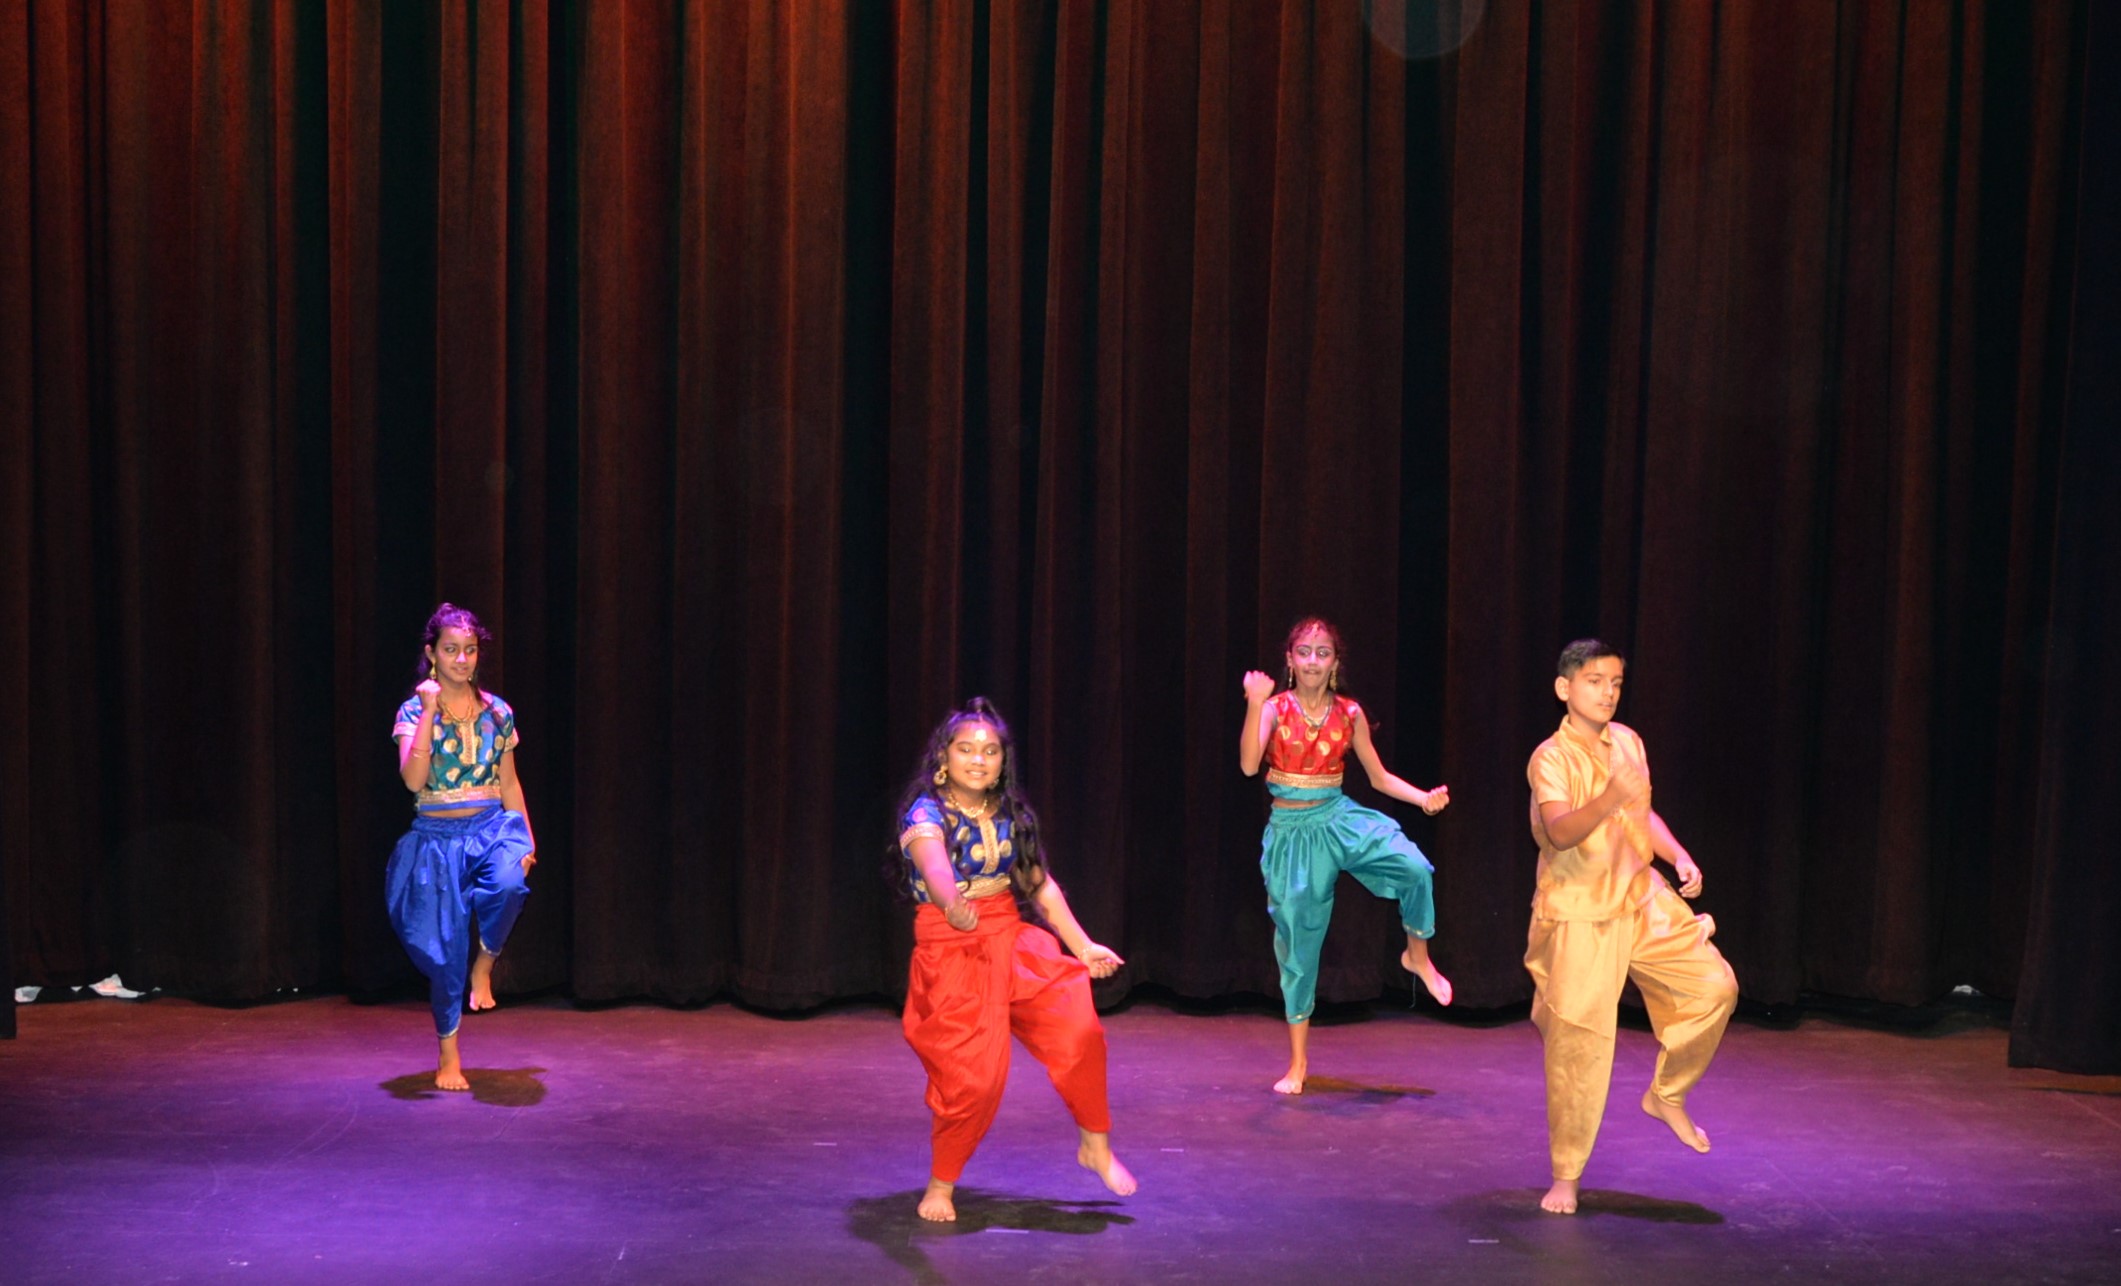 Dance Expression students showcasing their dance skills at the 2021 Dance Expression showcase, performing on stage in colourful traditional attire against a red curtain backdrop.